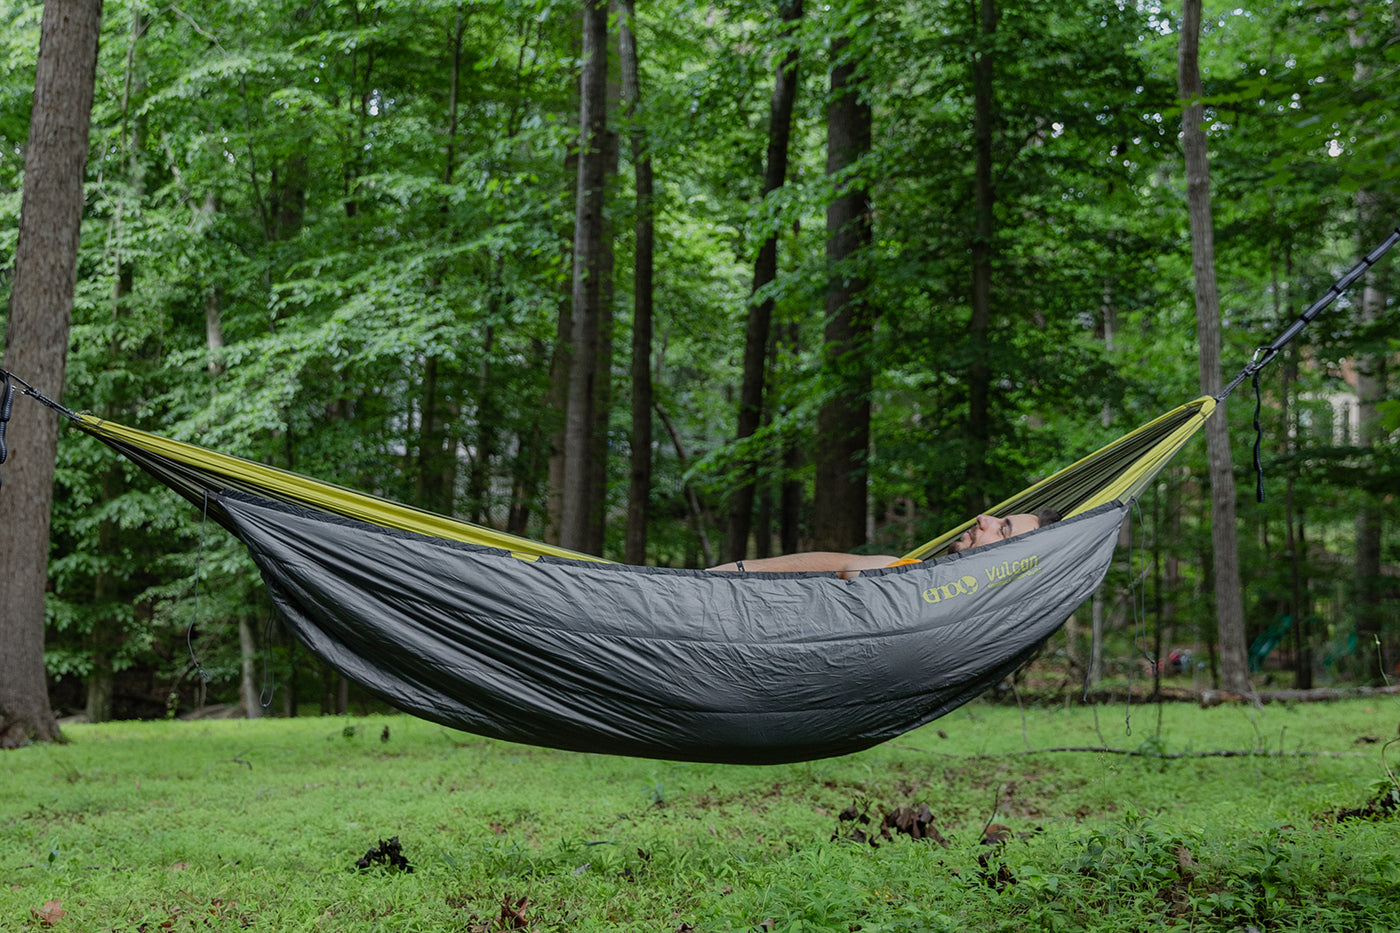 A man lays in a DoubleNest Hammock using a Vulcan UnderQuilt to keep warm.